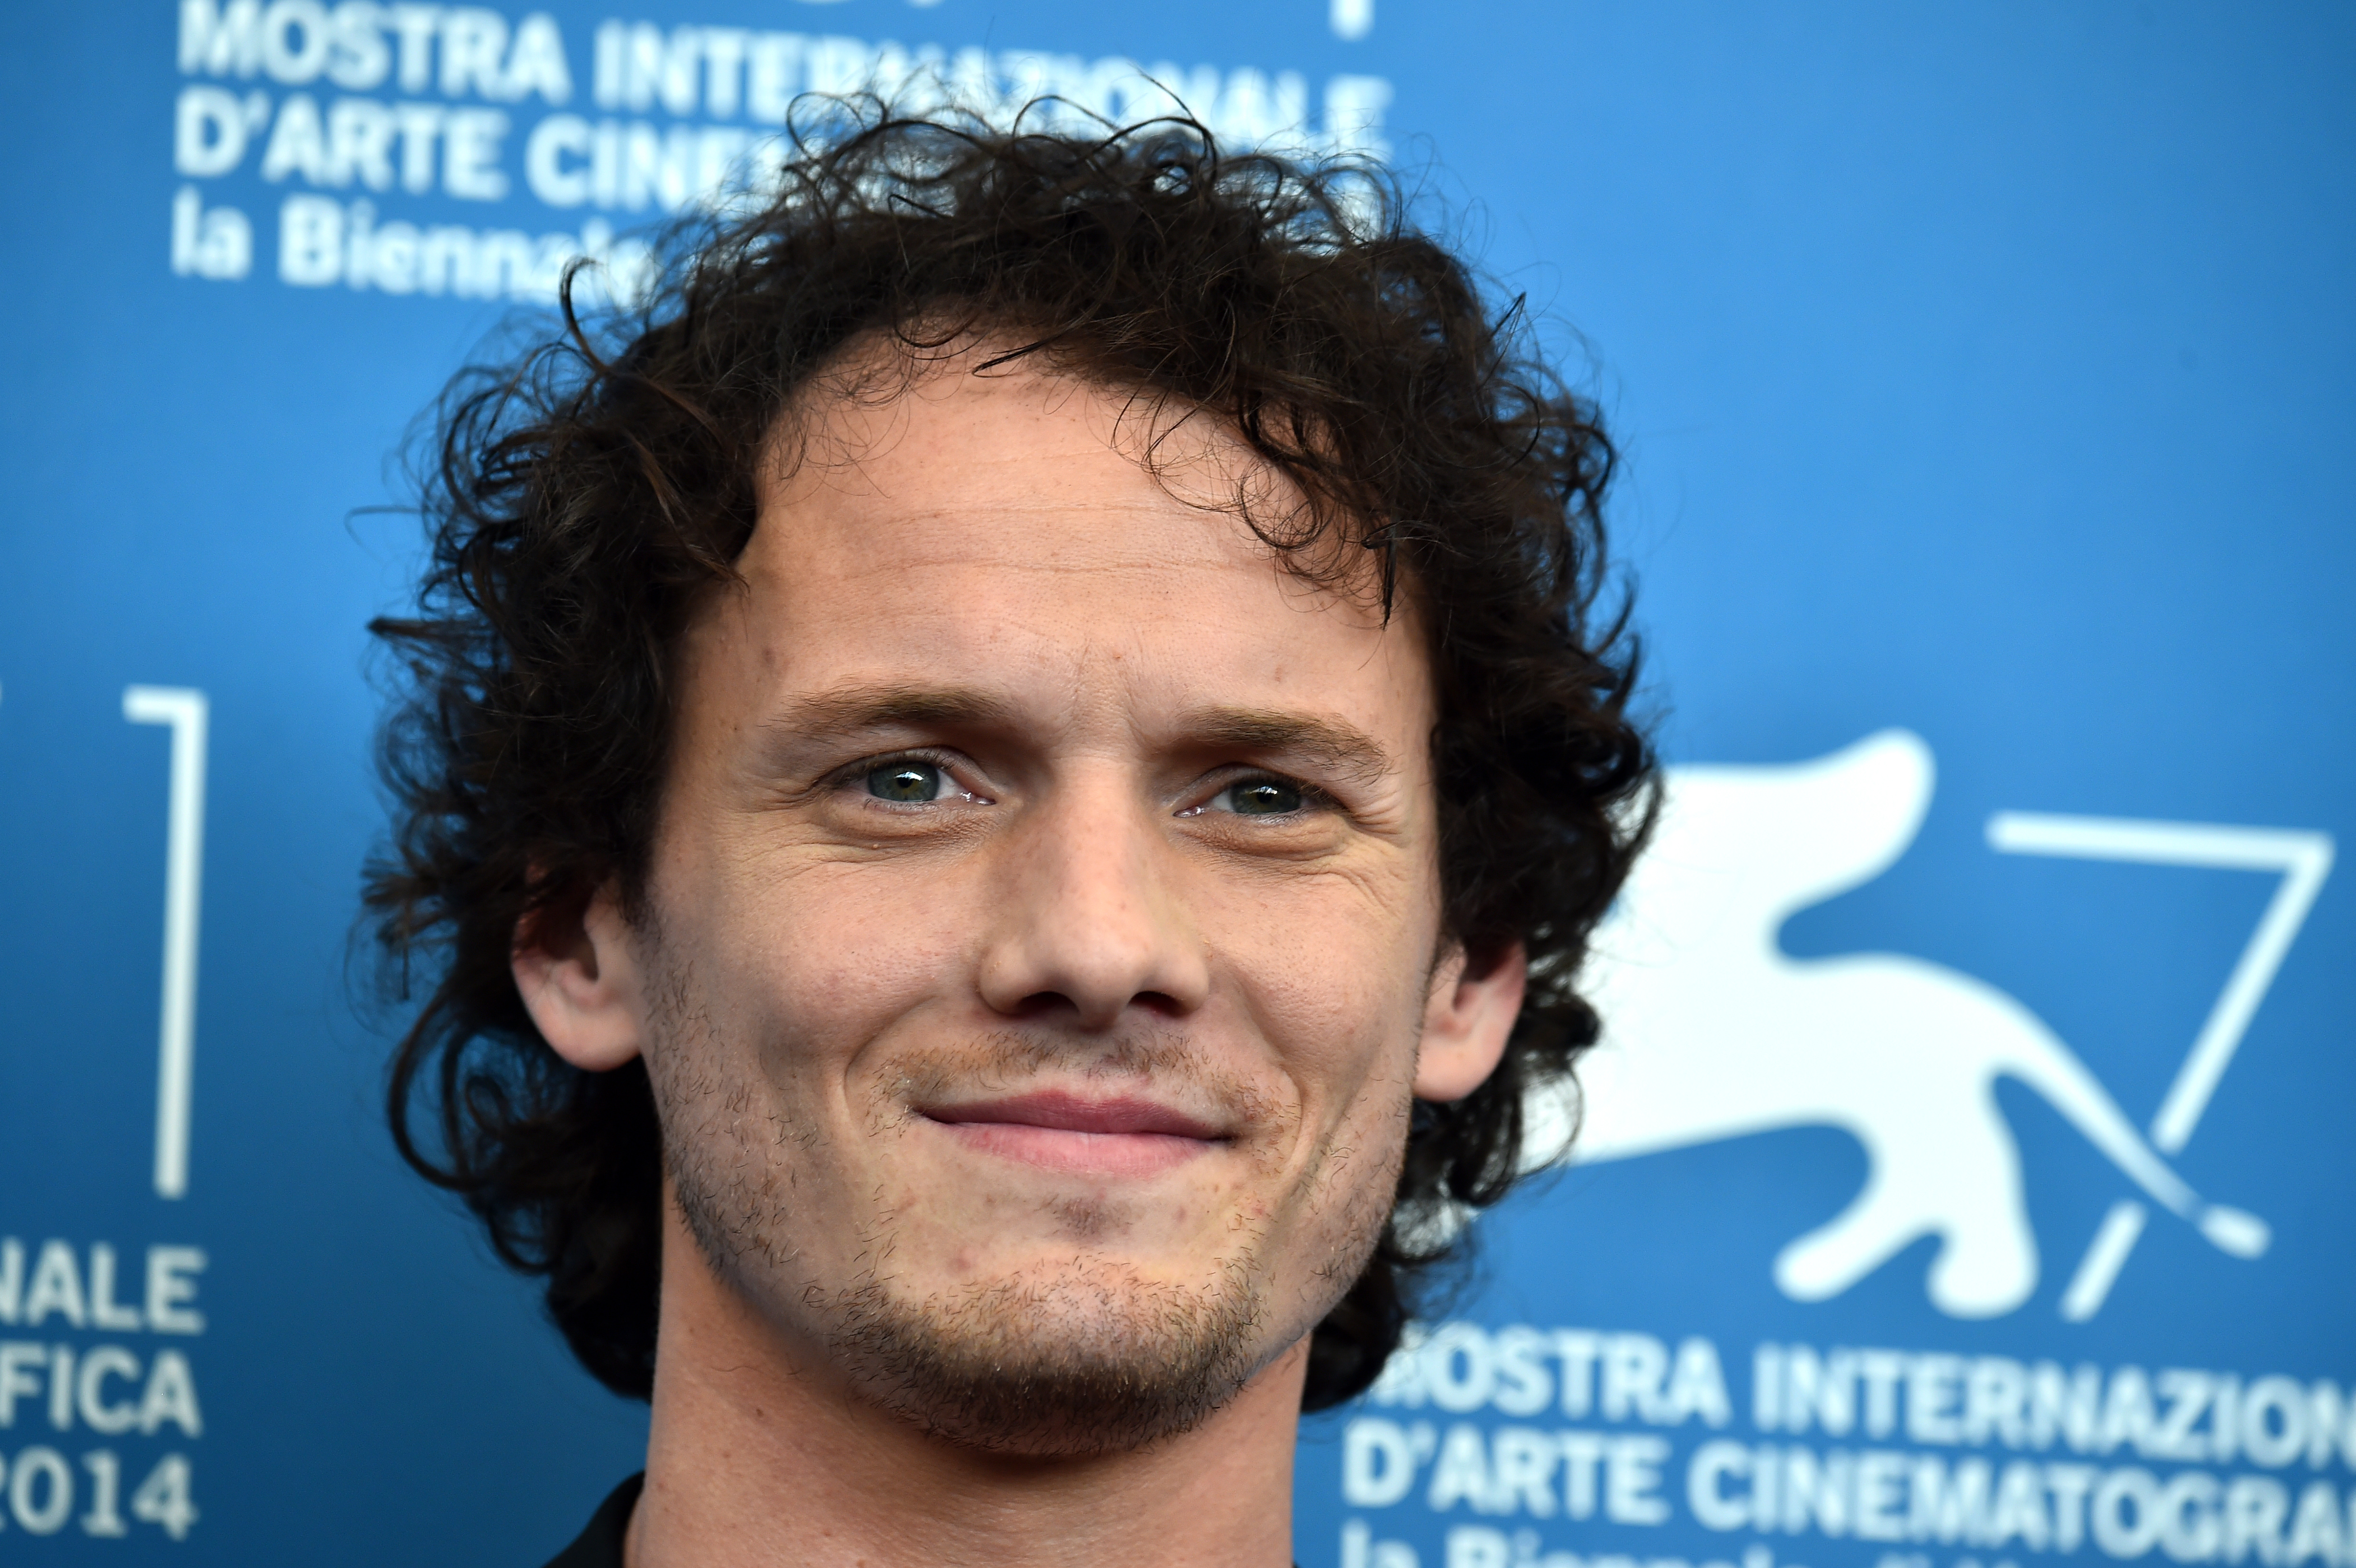 Actor Anton Yelchin poses during the photocall of the movie "Cymbeline" presented in the Orizzonti selection at the 71st Venice Film Festival on September 3, 2014 at Venice Lido. AFP PHOTO / GABRIEL BOUYS / AFP PHOTO / GABRIEL BOUYS